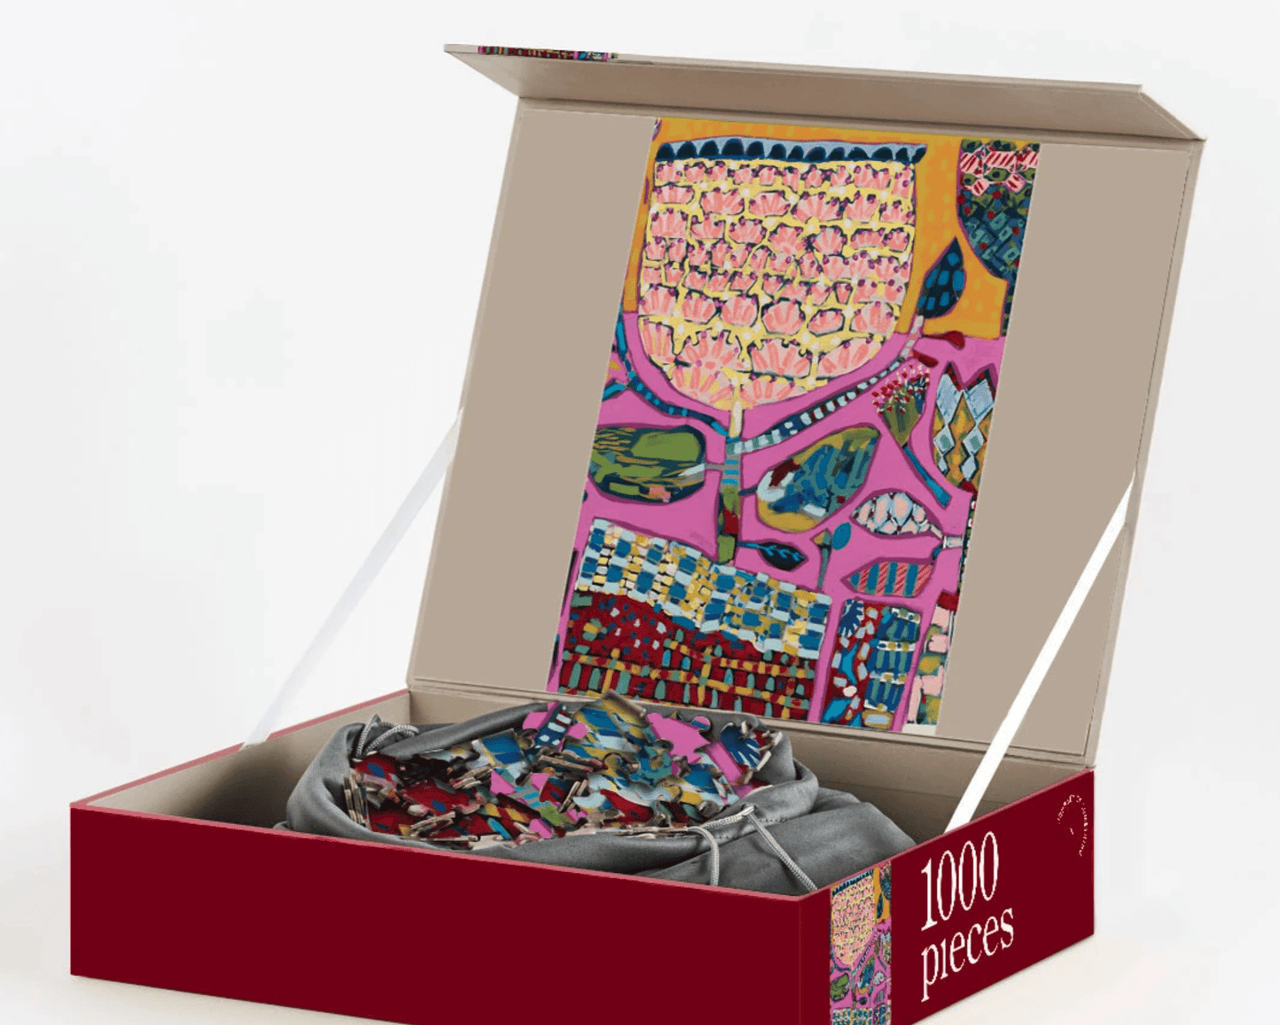 A box containing a 1000 Piece Puzzle - Mexicana with a colorful design on it, made by Journey of Something.